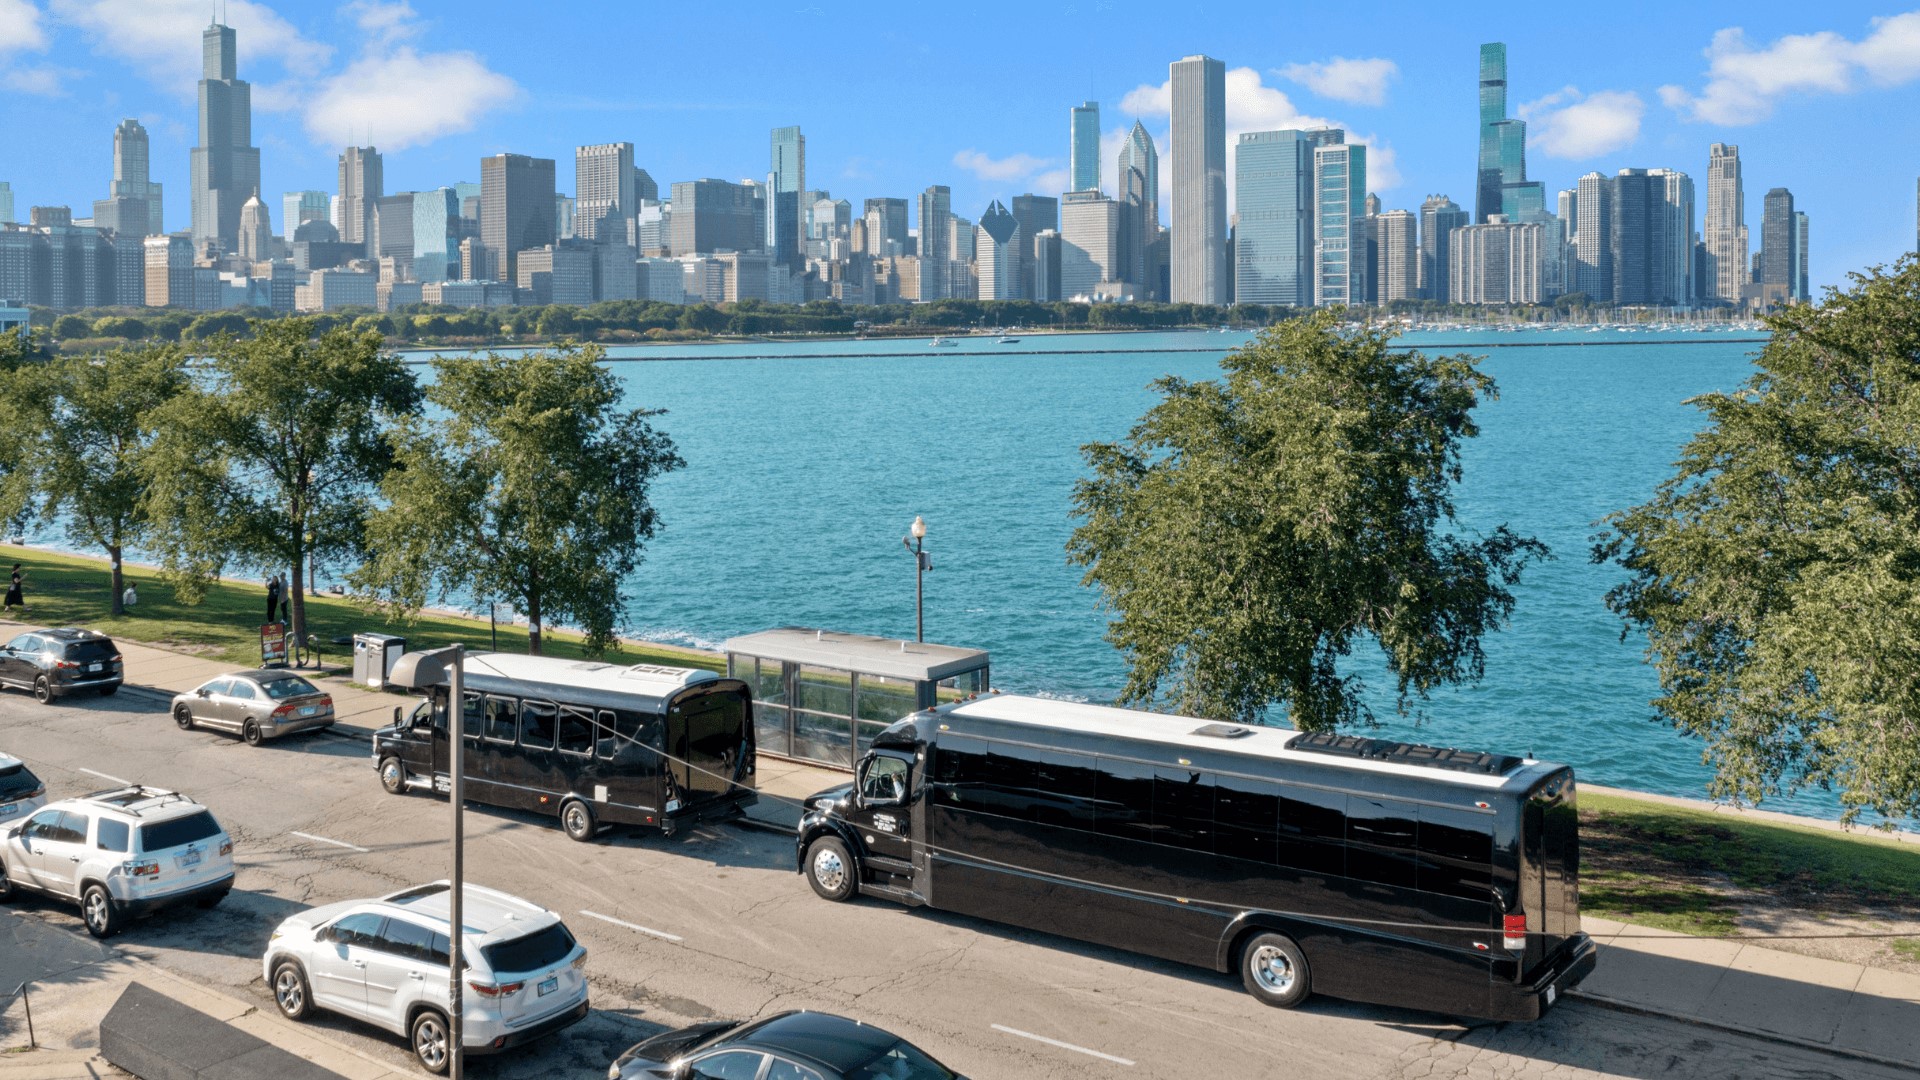 several buses are parked on the side of the road with the Chicago skyline in the background